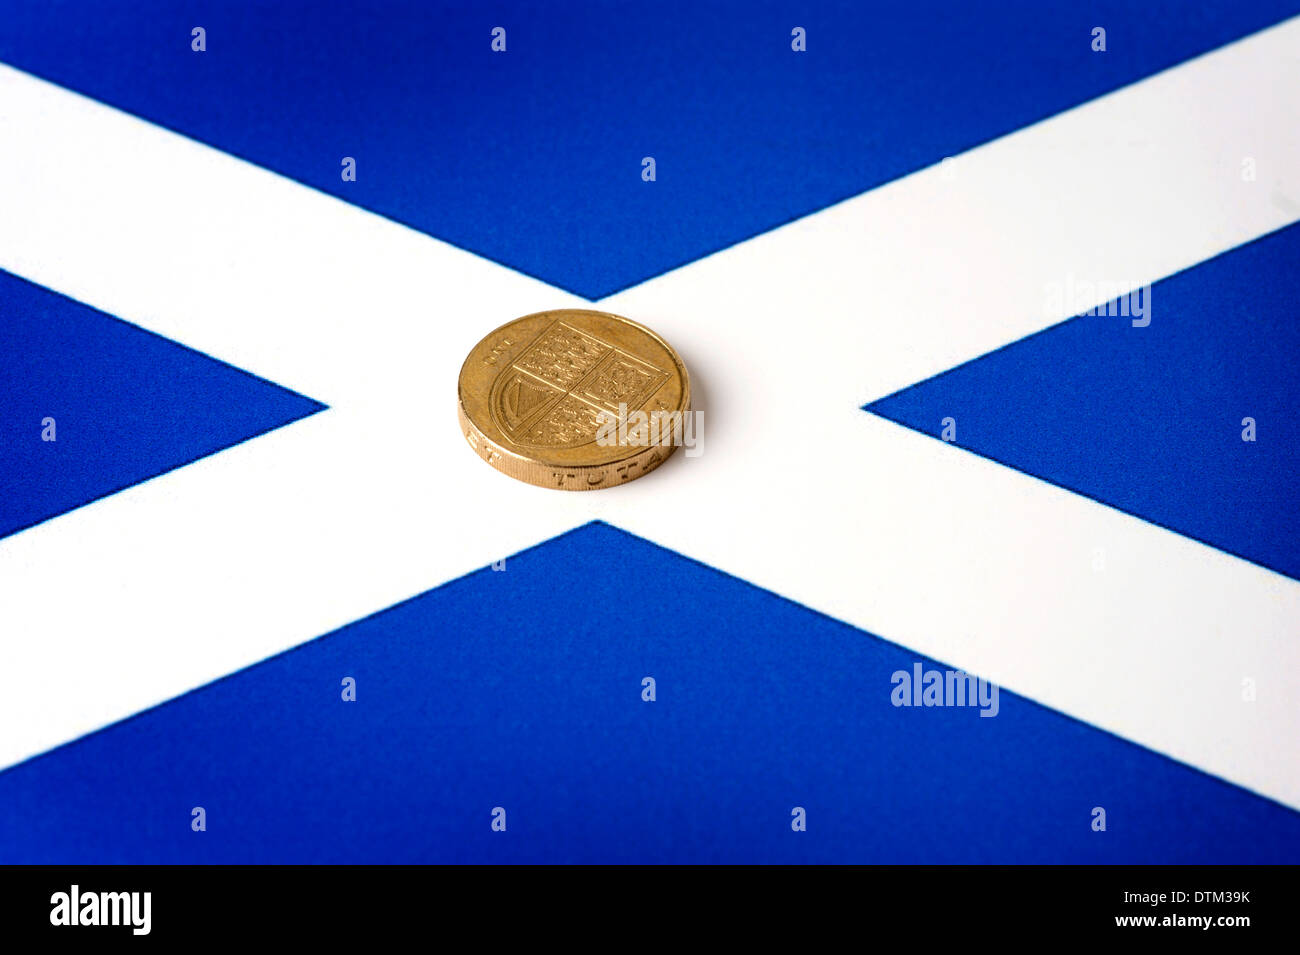 Scotland Independence generic image of a pound coin on a Scottish flag background Stock Photo